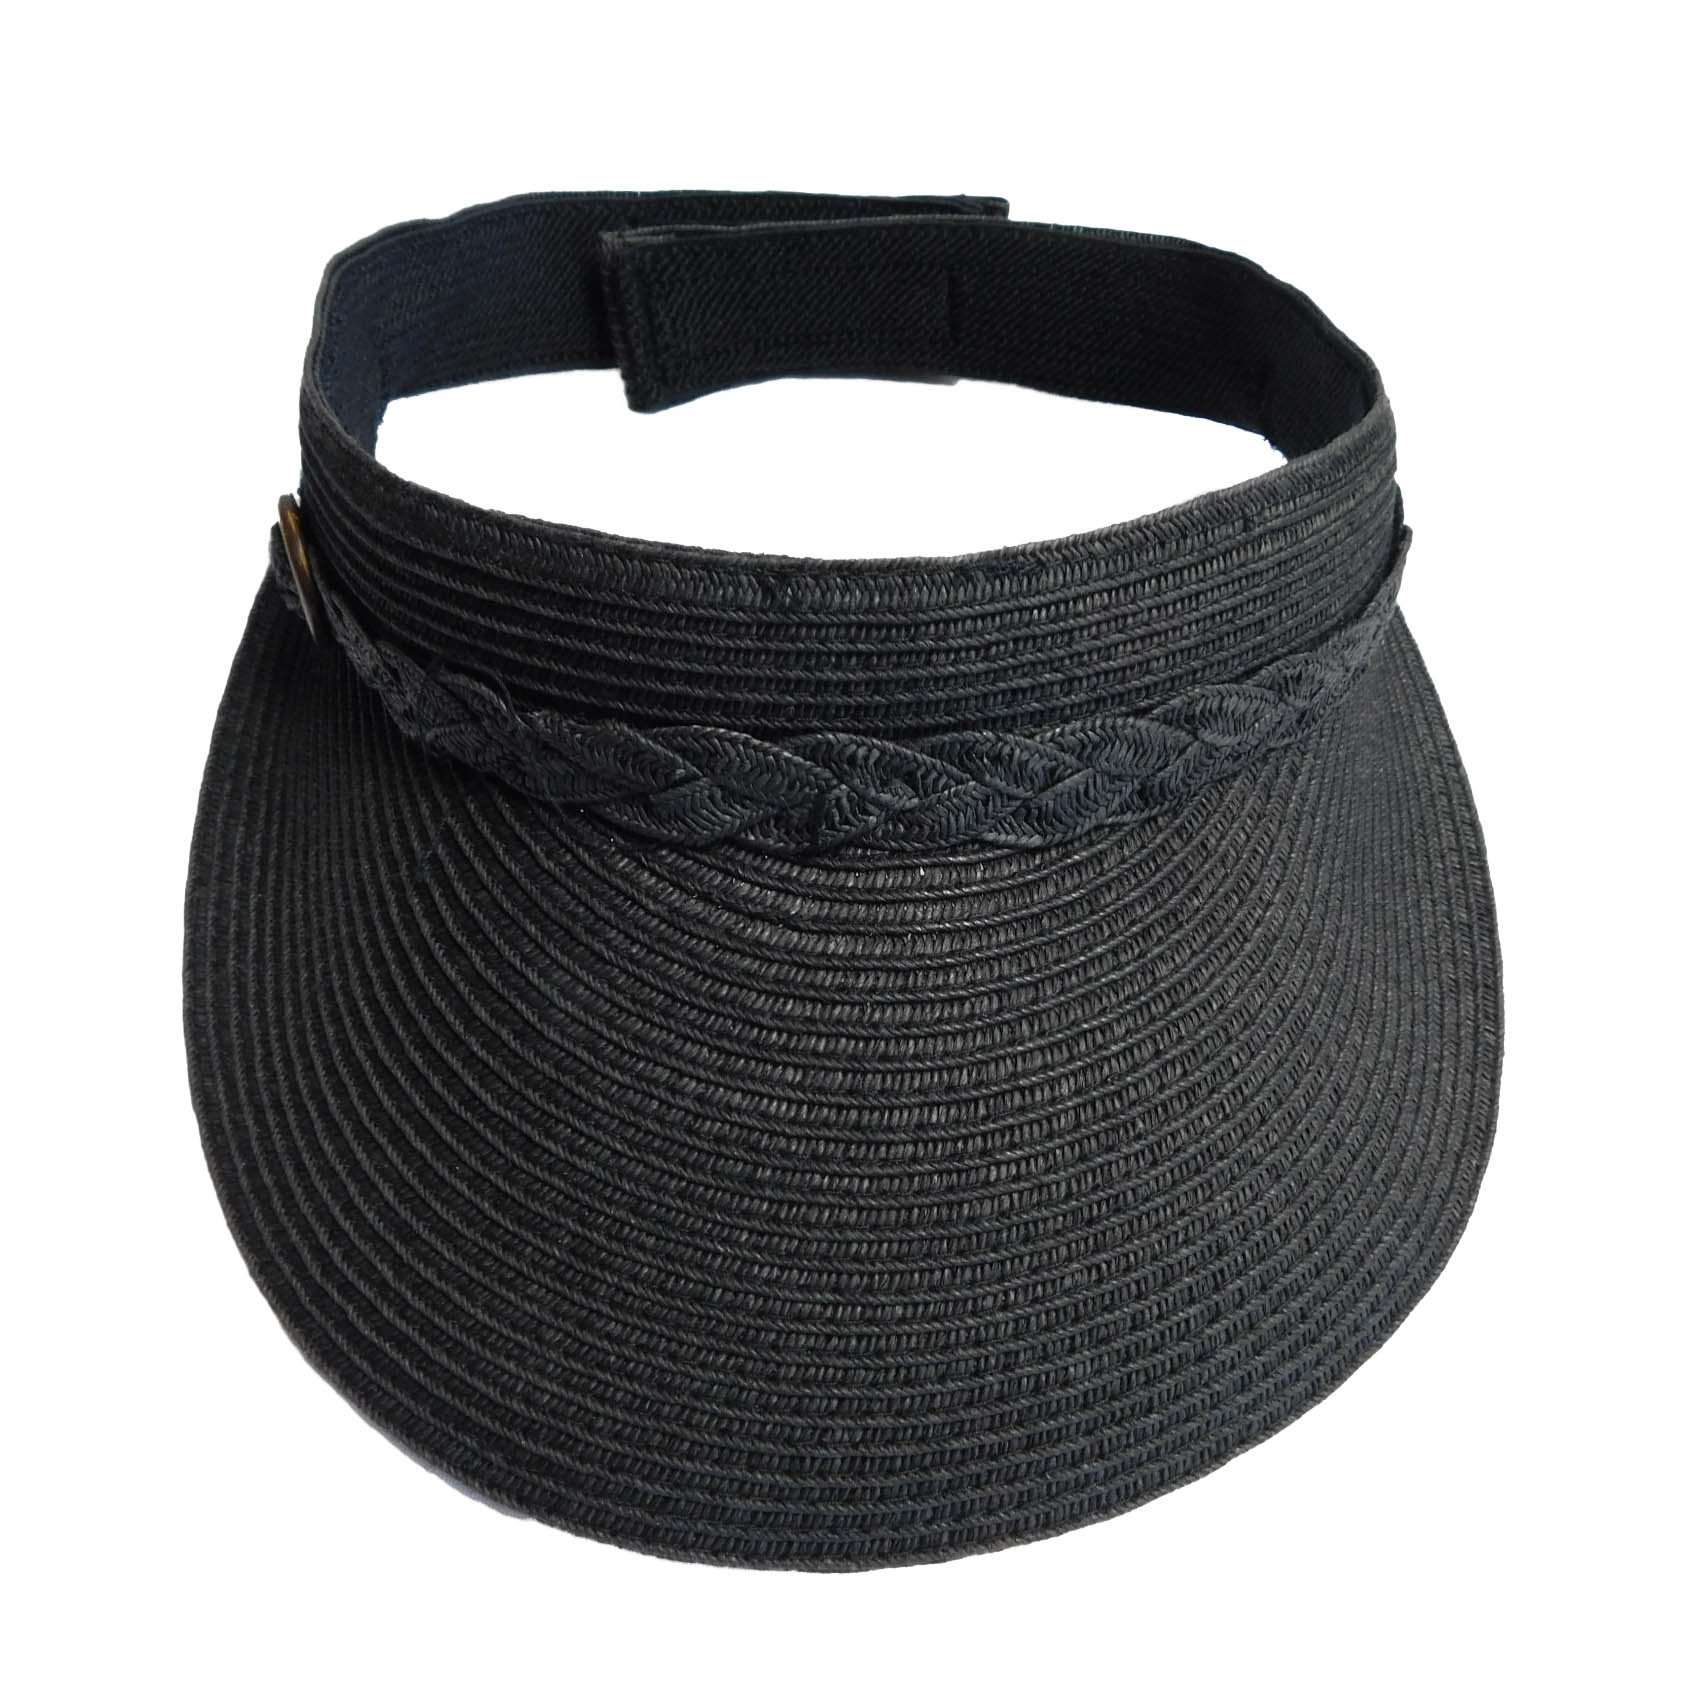 Straw Visor with Buckle Accent Visor Cap Boardwalk Style Hats    